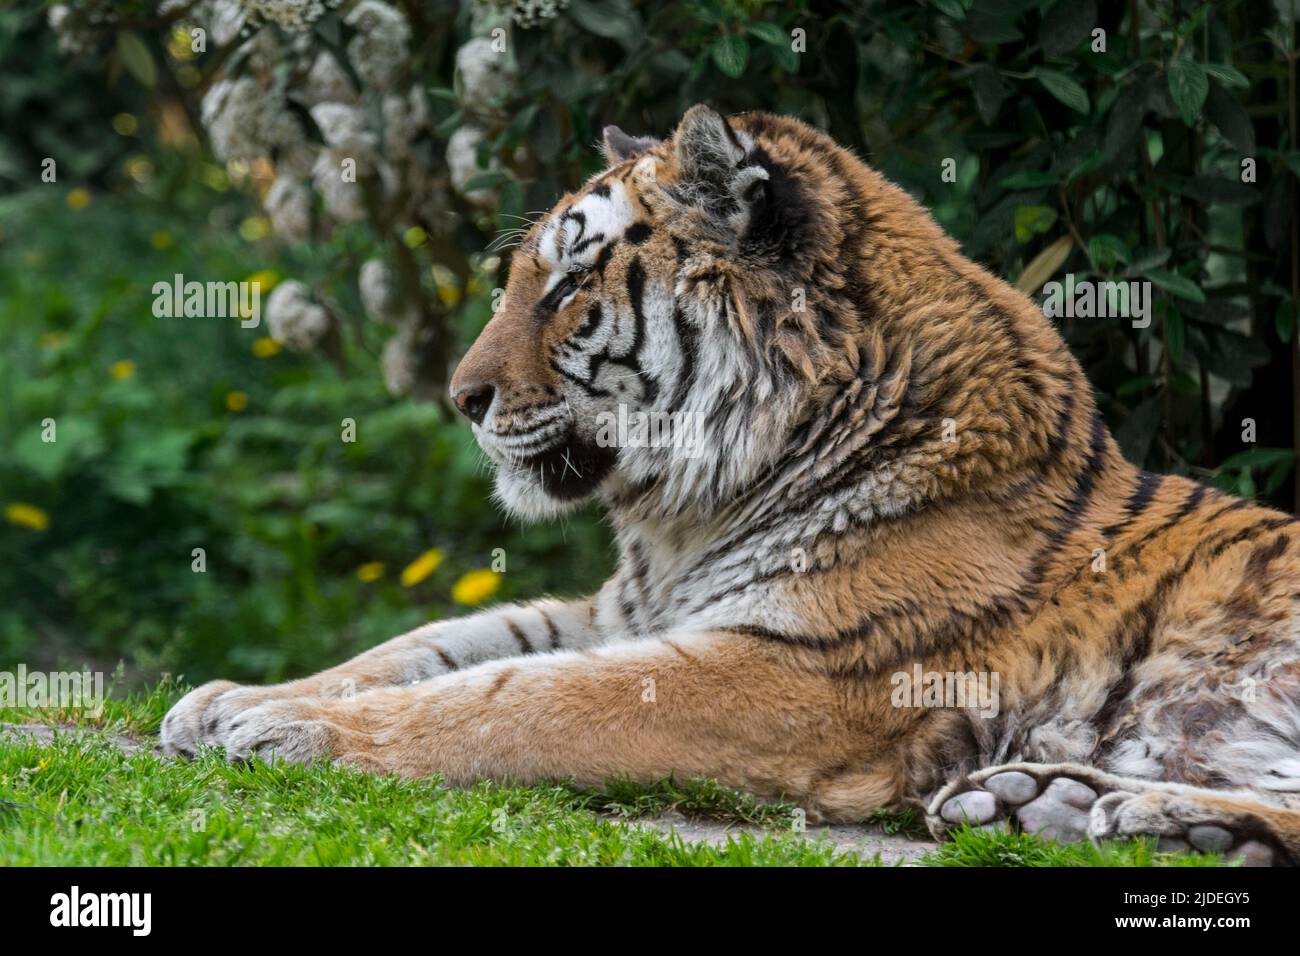 Siberian tiger (Panthera tigris altaica) resting in zoo / zoological park Stock Photo